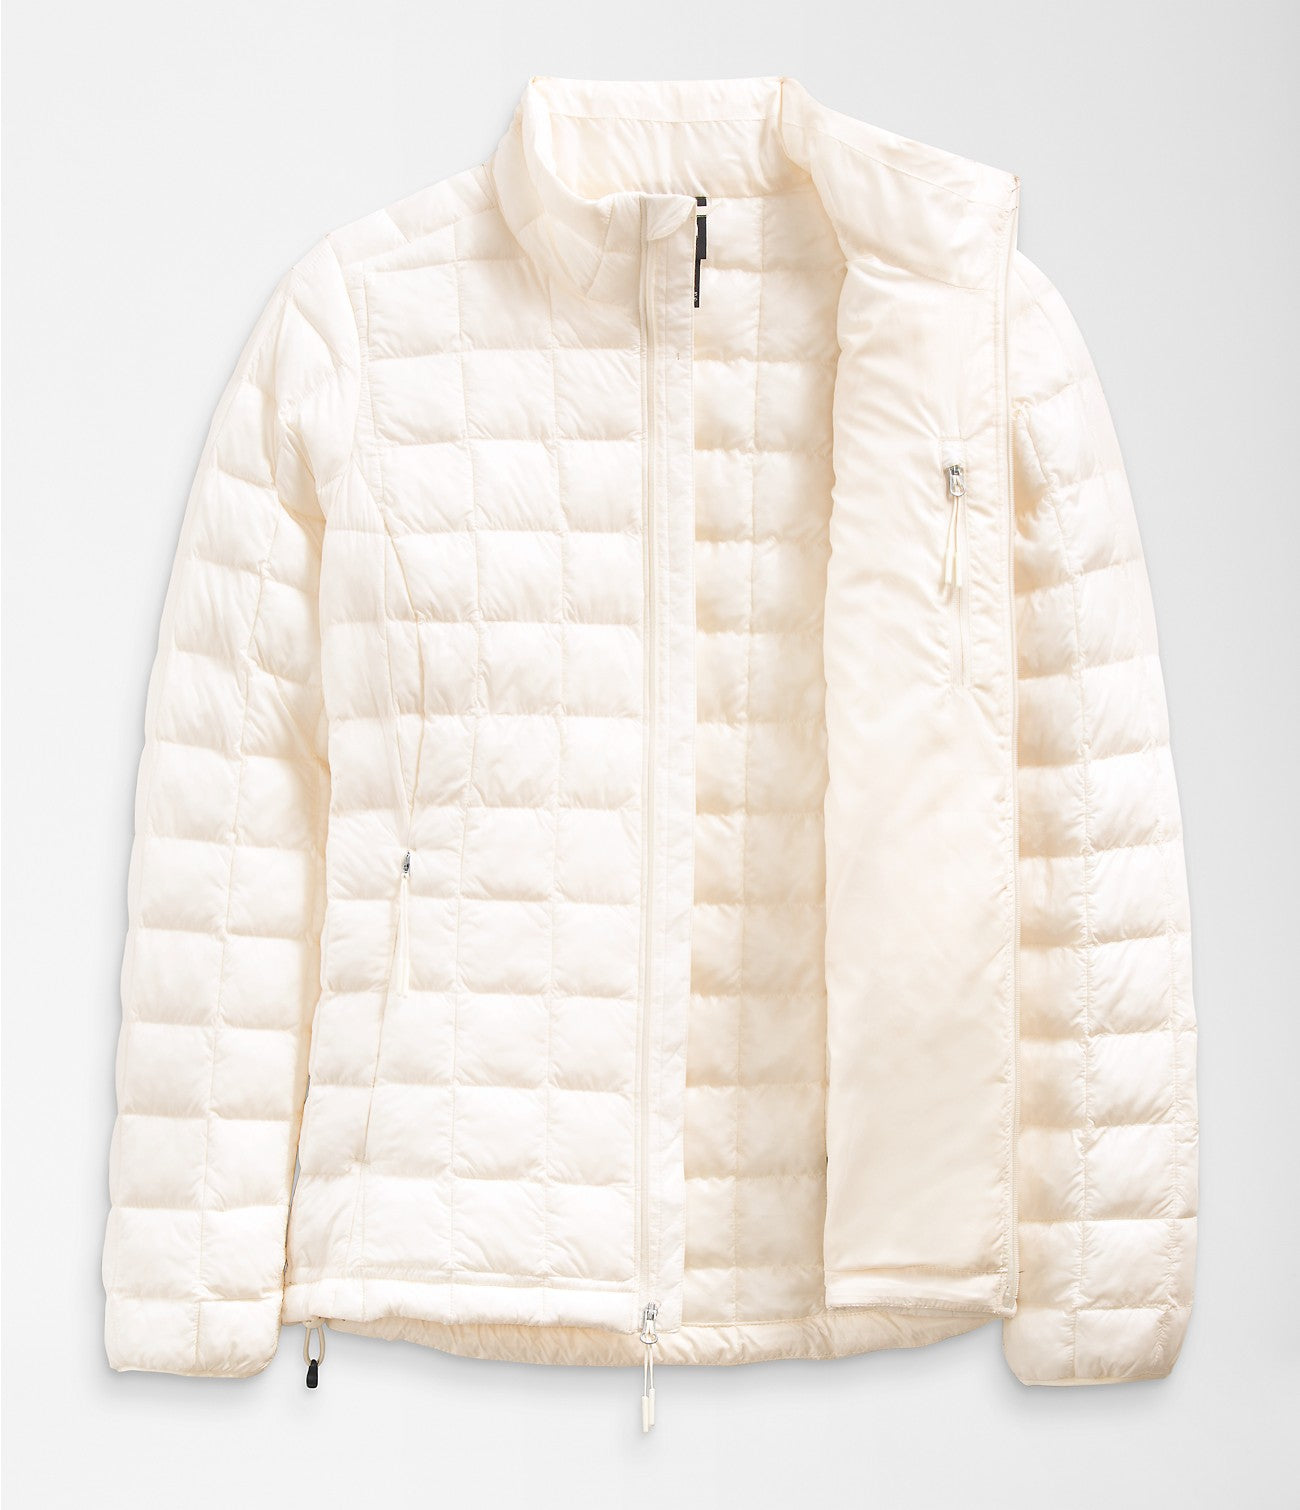 The North Face Women's Thermoball Eco Jacket 2.0